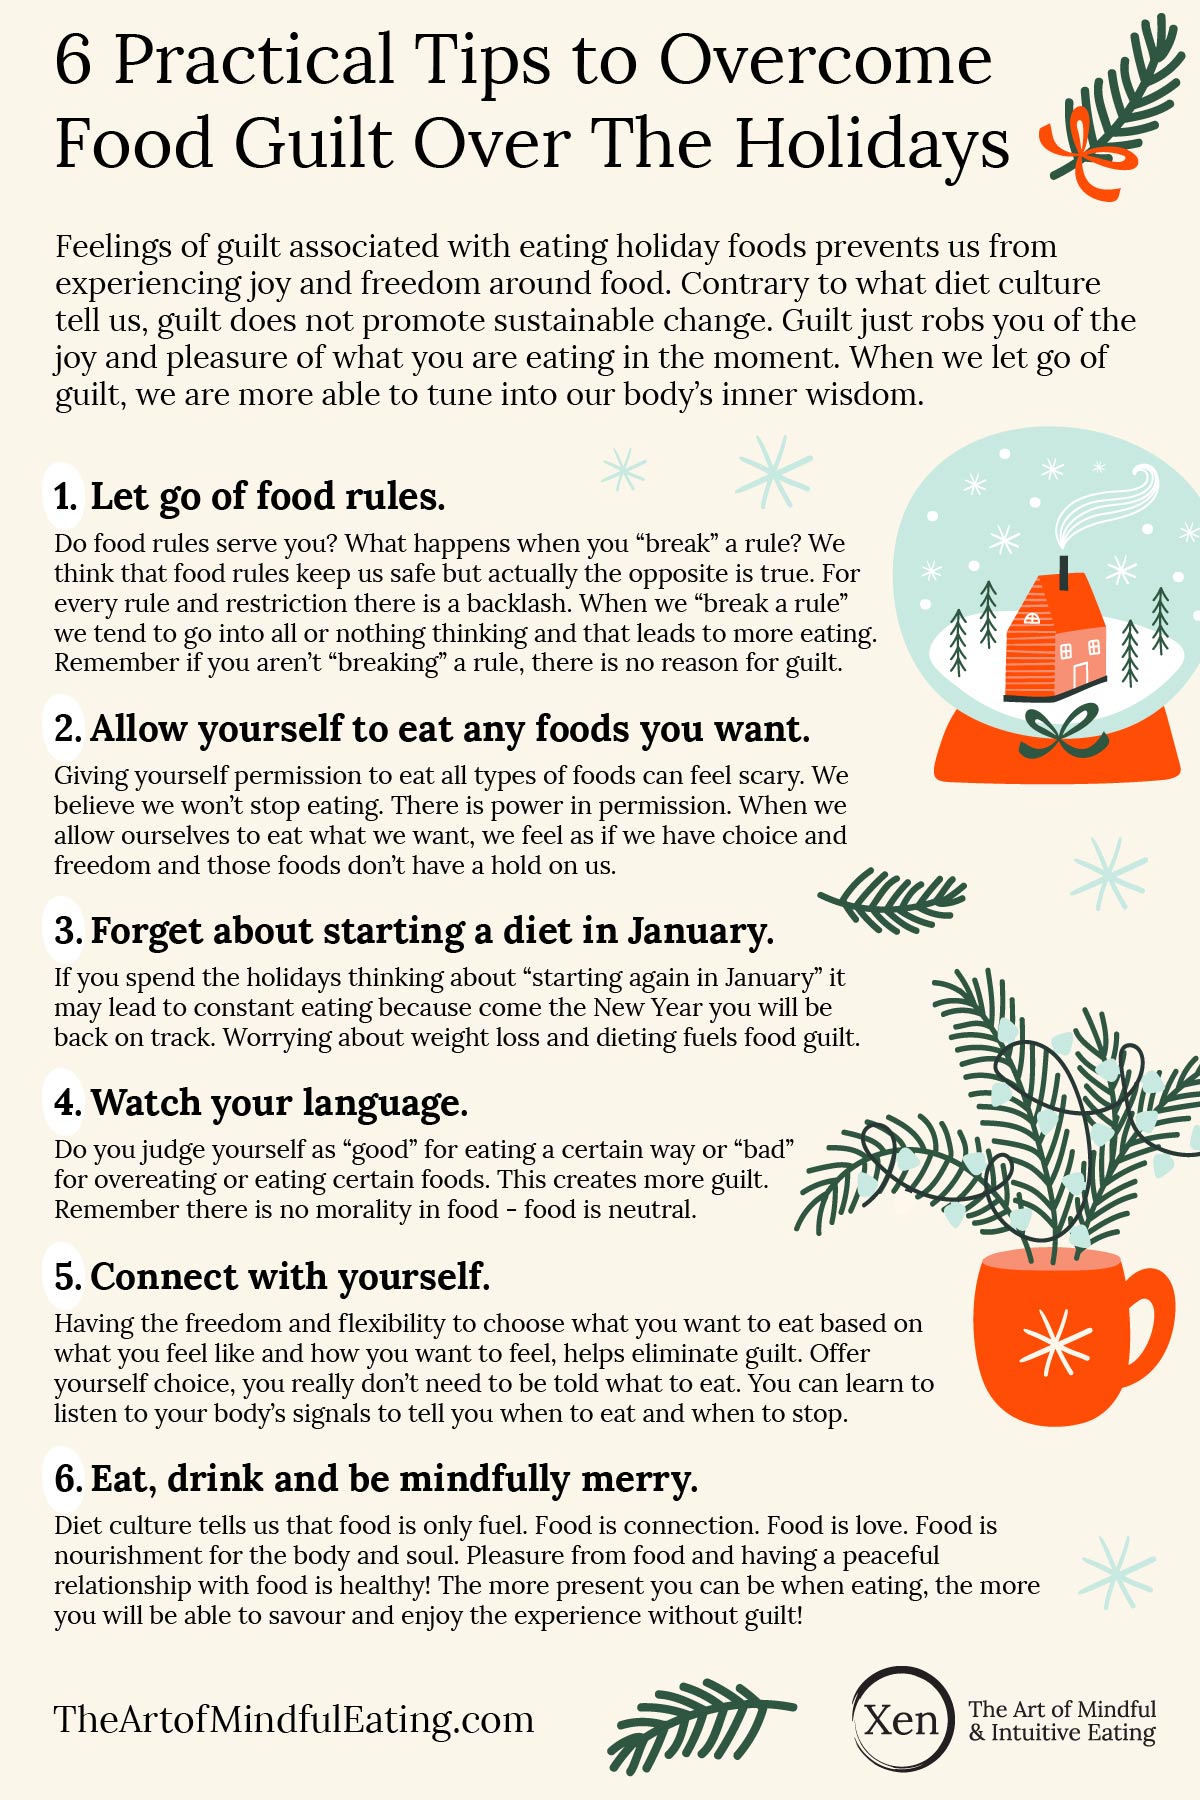 6 Practical Tips to Overcome Food Guilt Over The Holidays